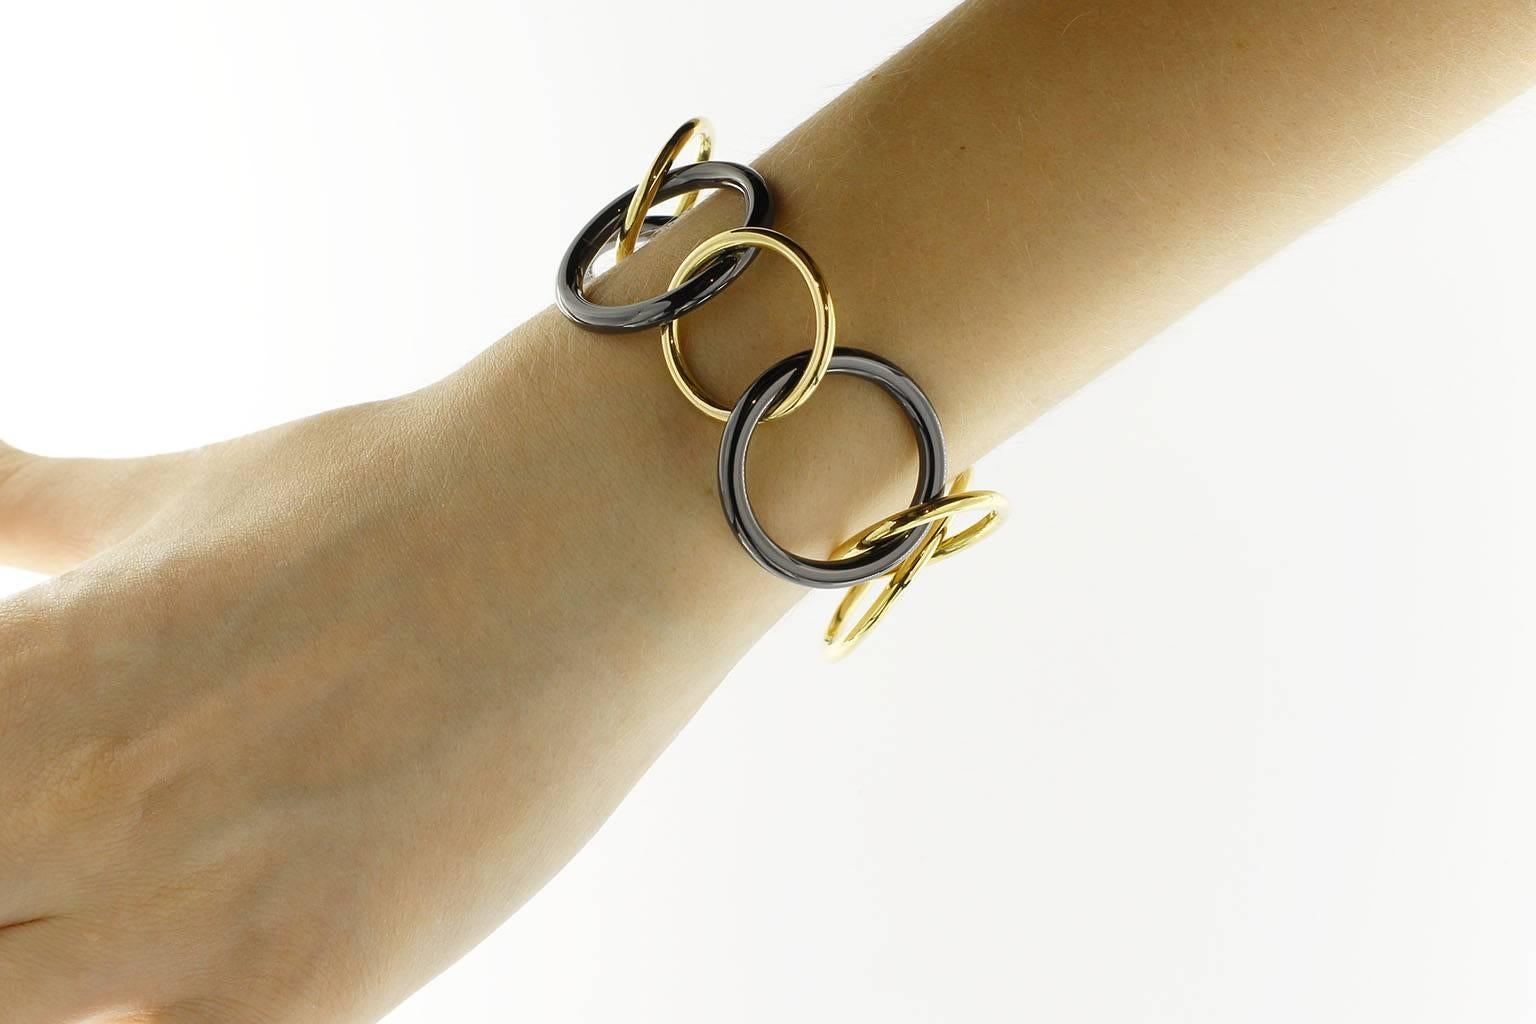 Jona design collection, hand crafted in Italy, 18k yellow gold and black high-tech ceramic circle link bracelet. 20.6cm long.
With a hardness approaching that of diamond, high-tech ceramic is a highly scratch-resistant material. Light and